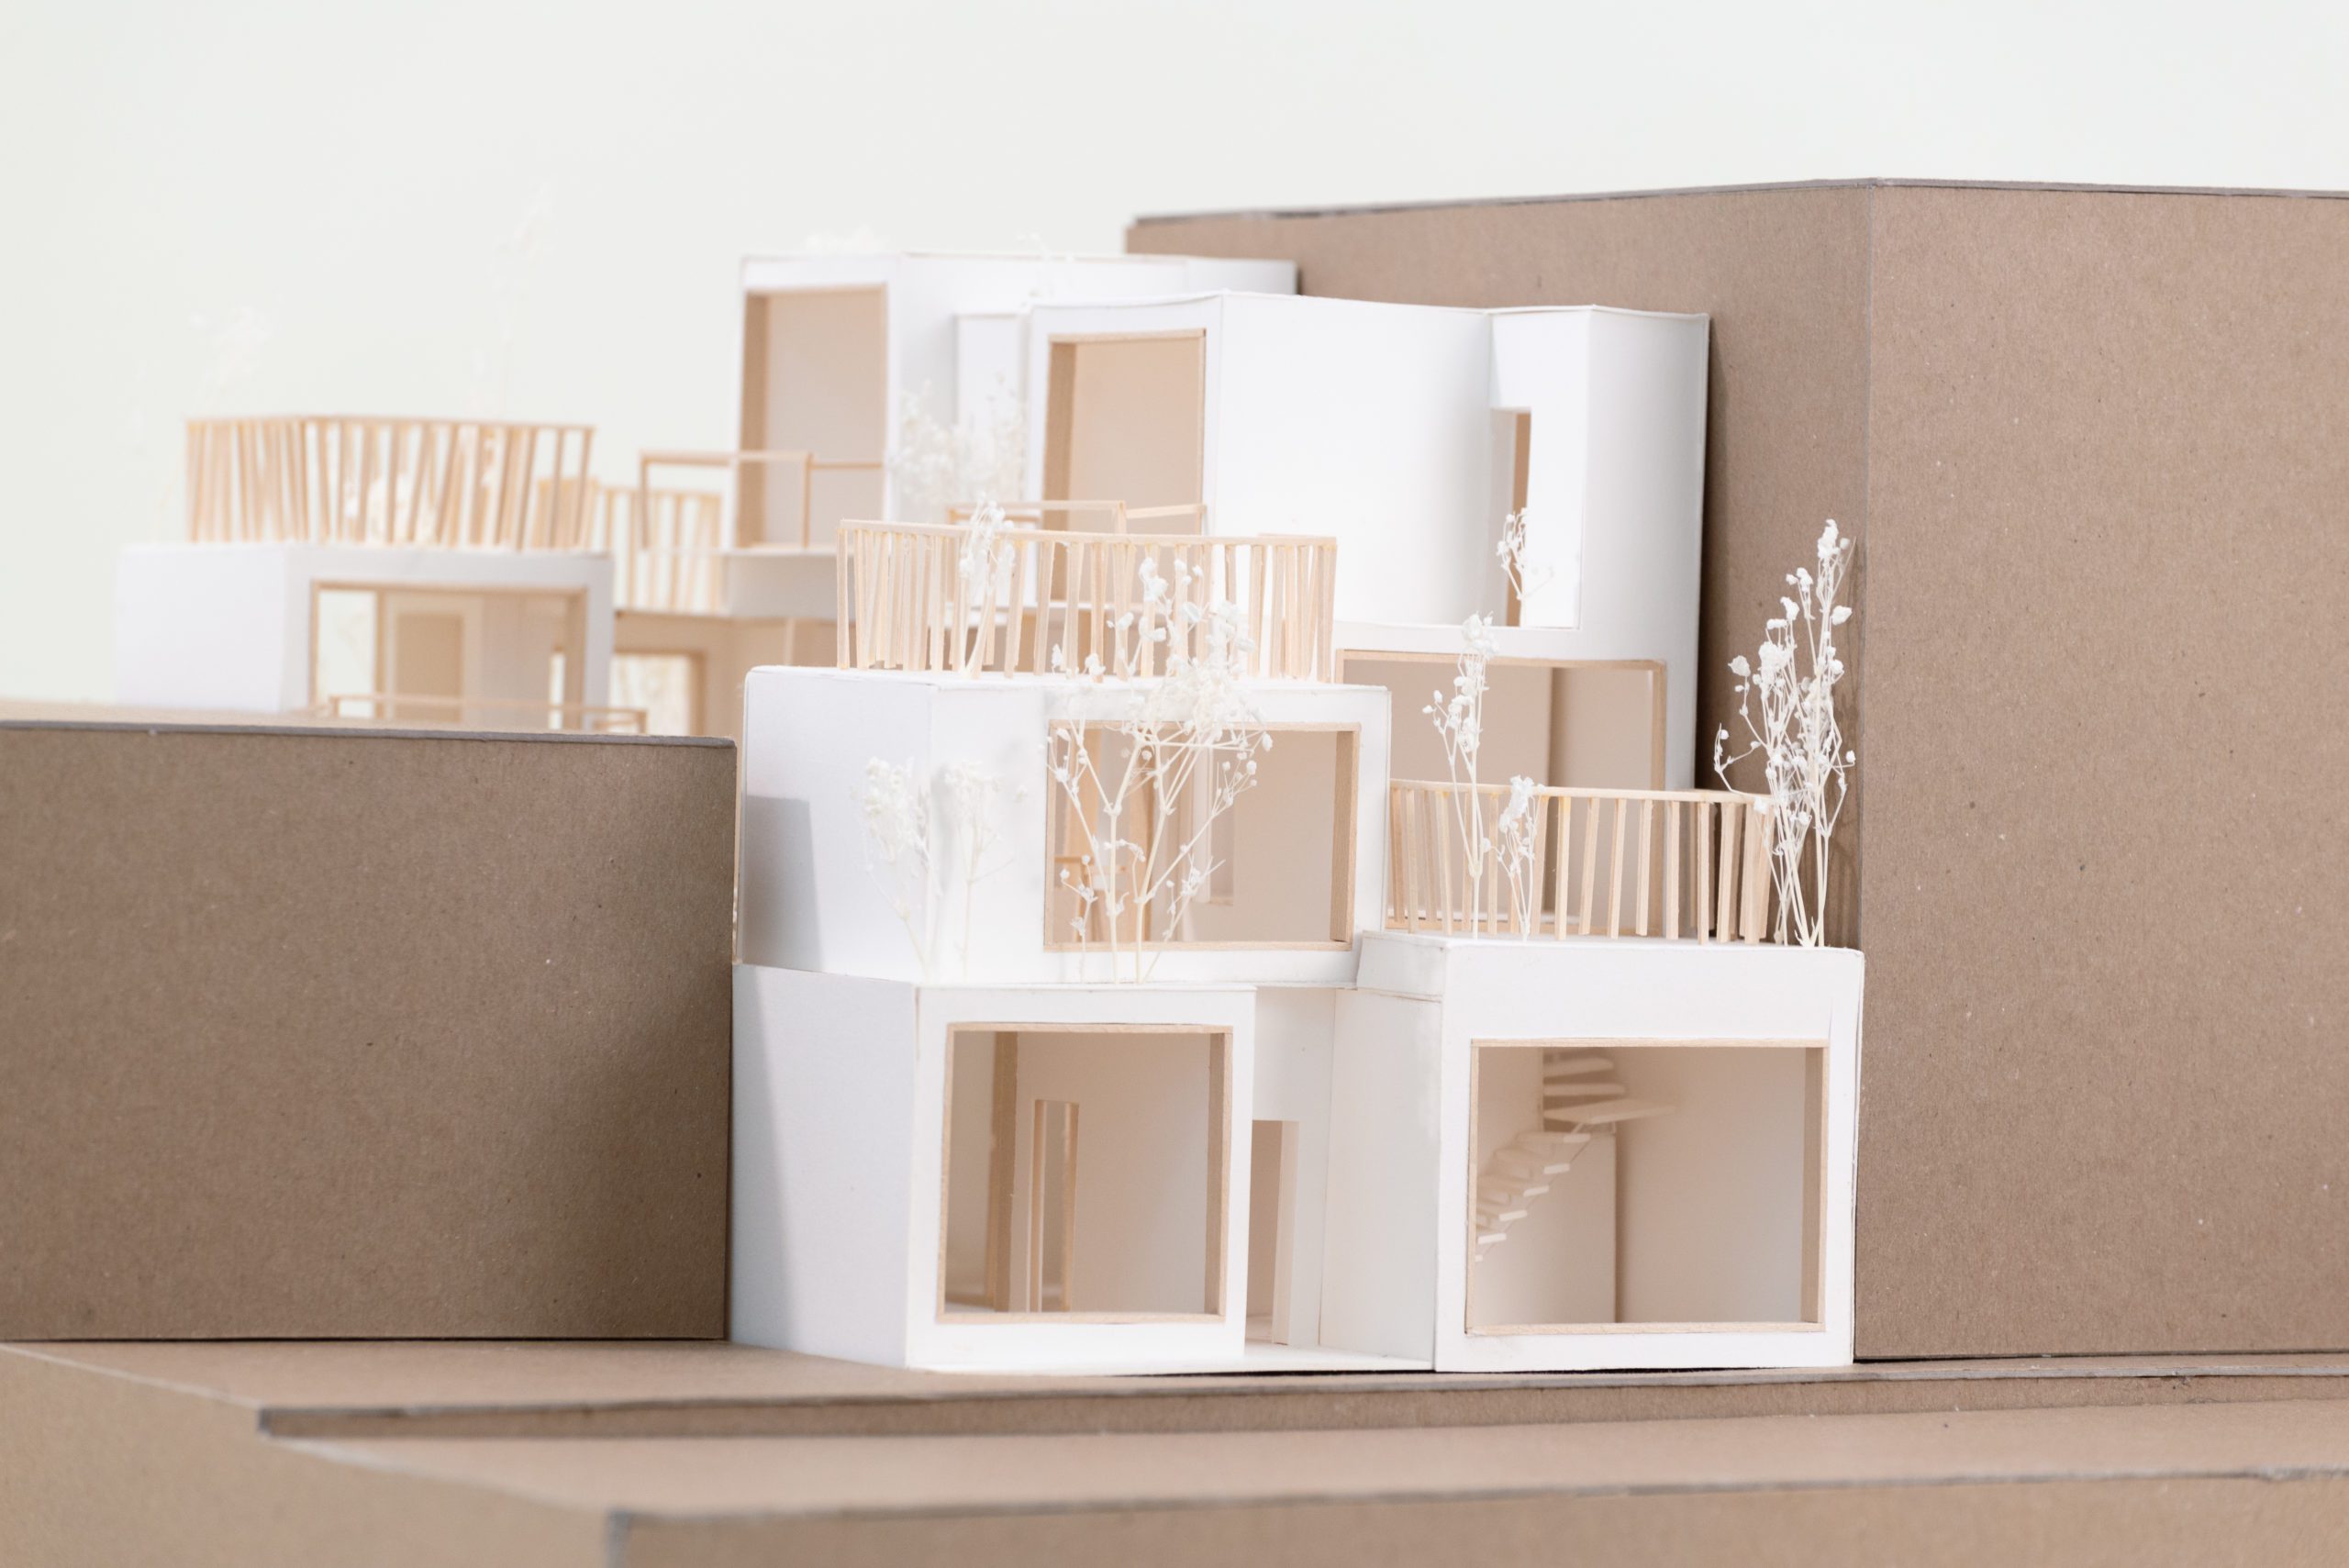 Architecture model in between carboard buildings